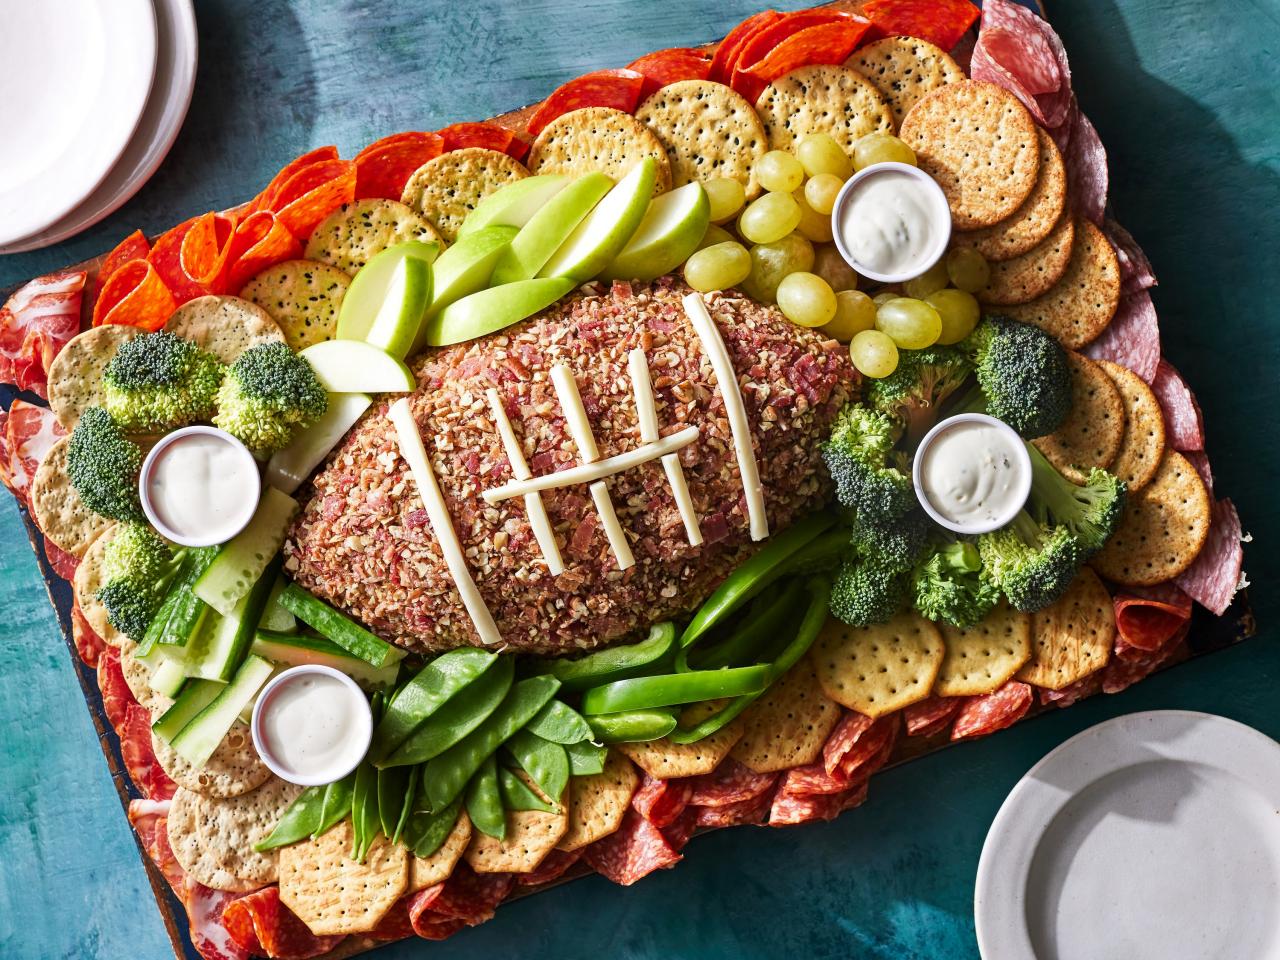 Fancy Super Bowl Snacks Made with Convenience Store Ingredients, Devour